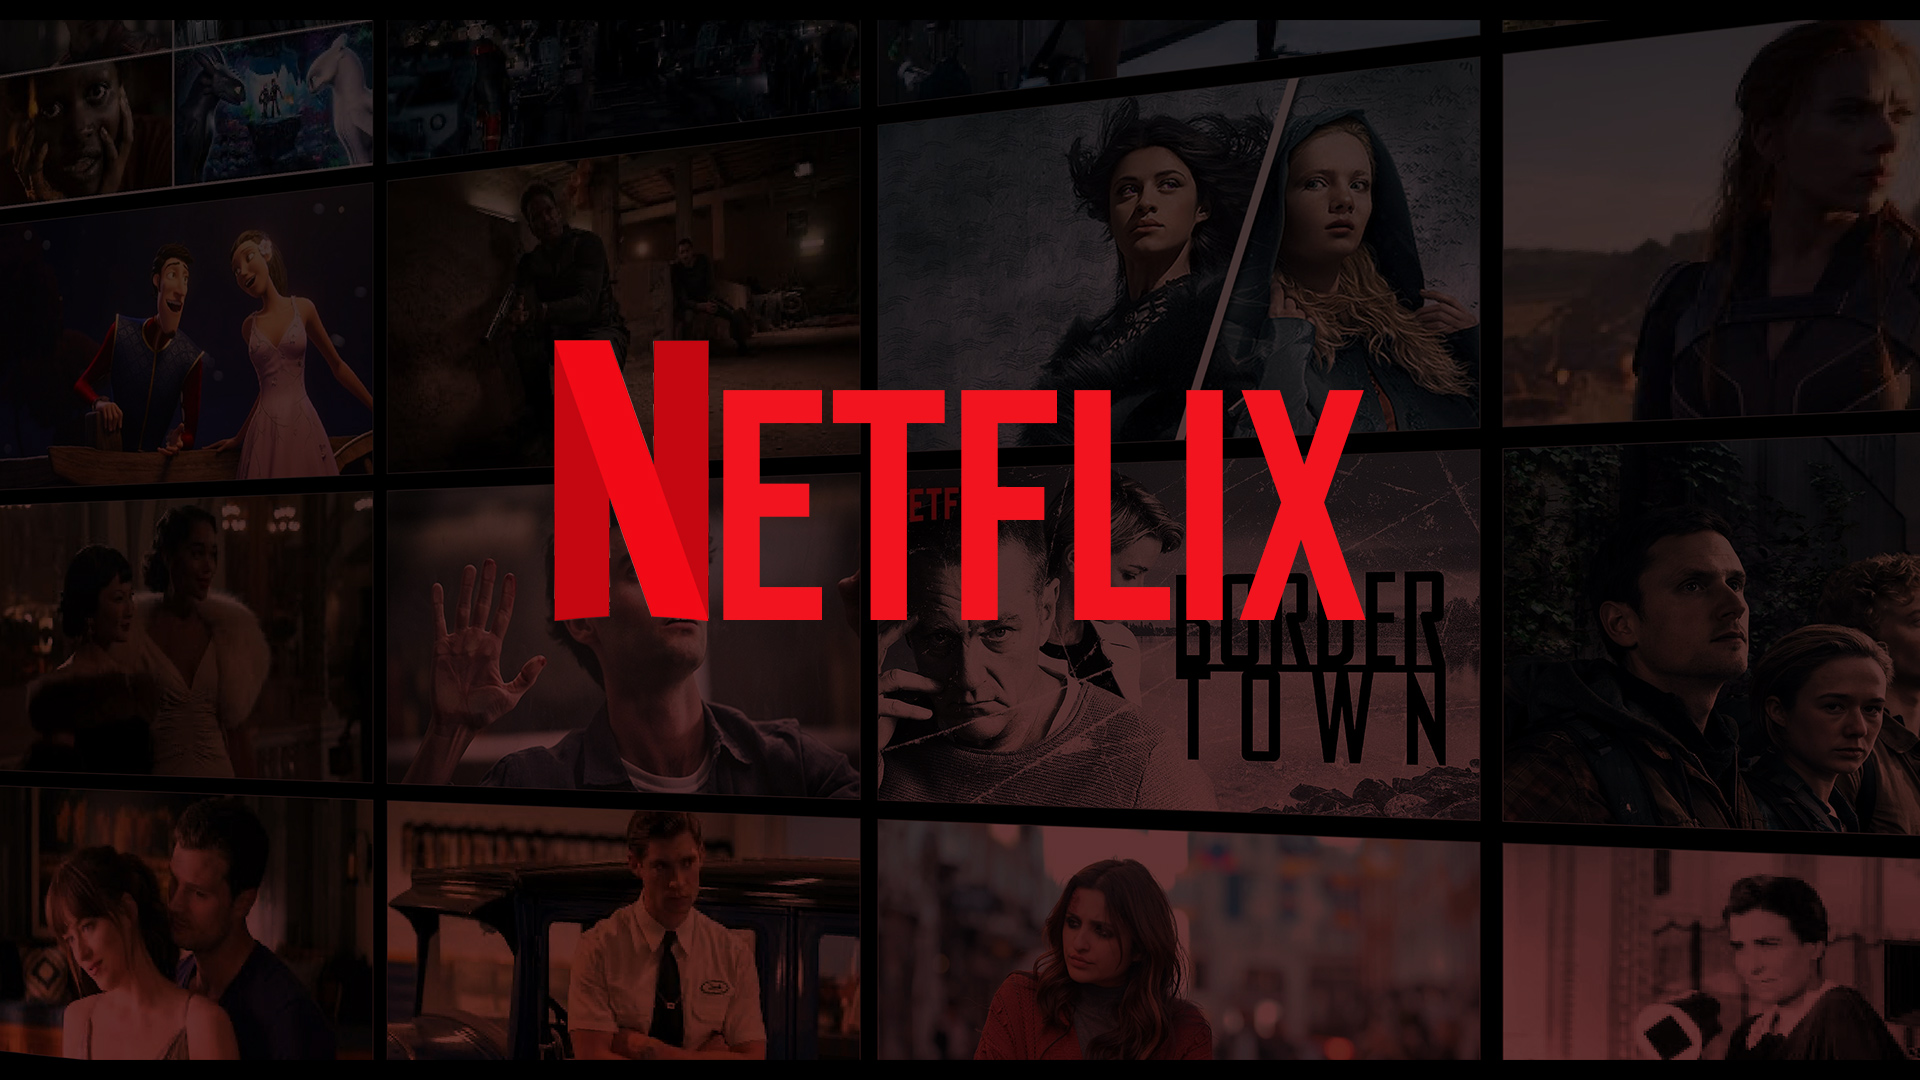 How To Pitch Your Film Or Tv Show To Netflix? Postpace Blog